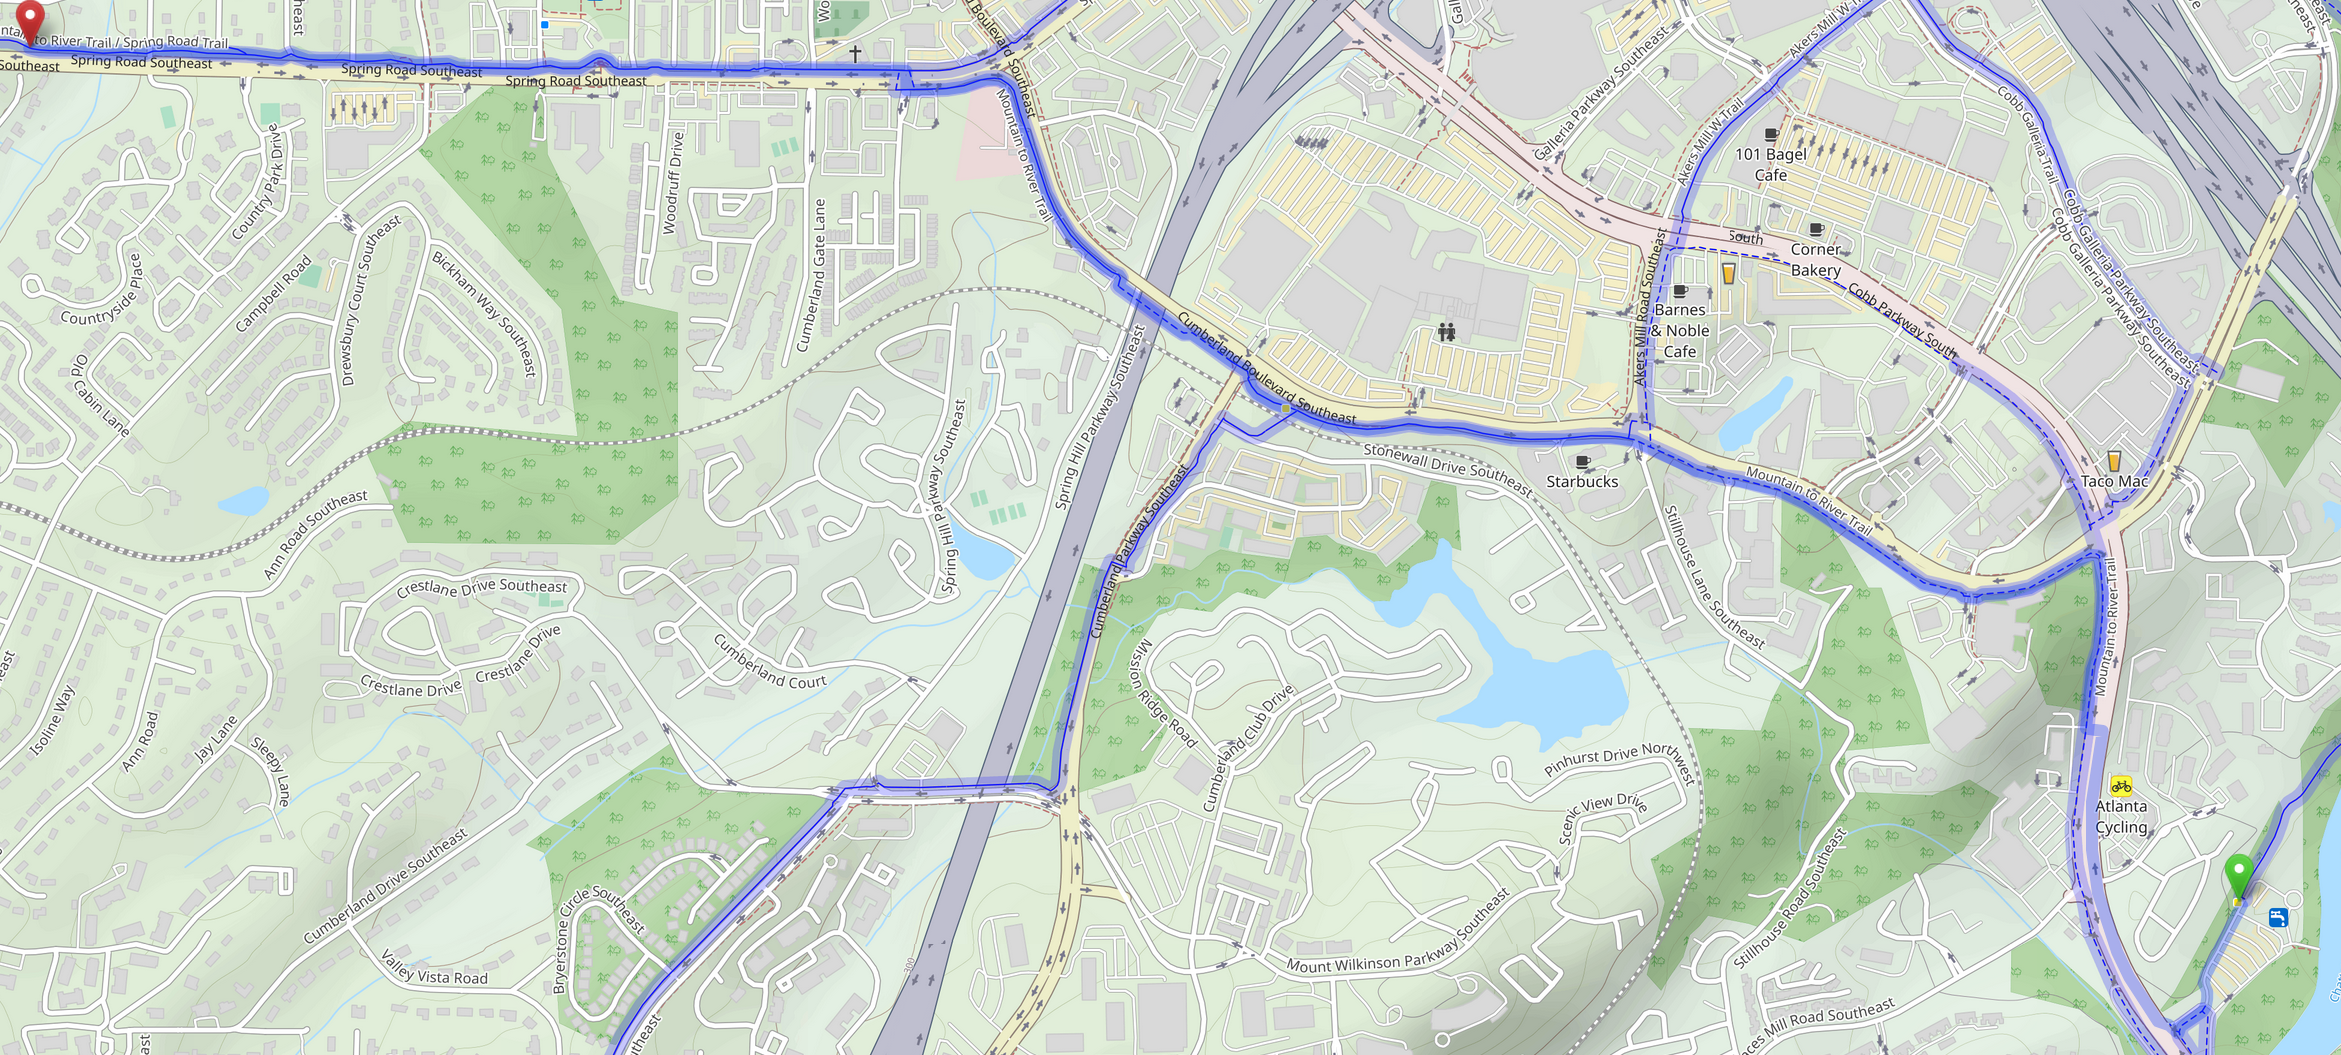 a map showing bike directions between the CRNRA at Paces Mill and Spring Road Linear Park